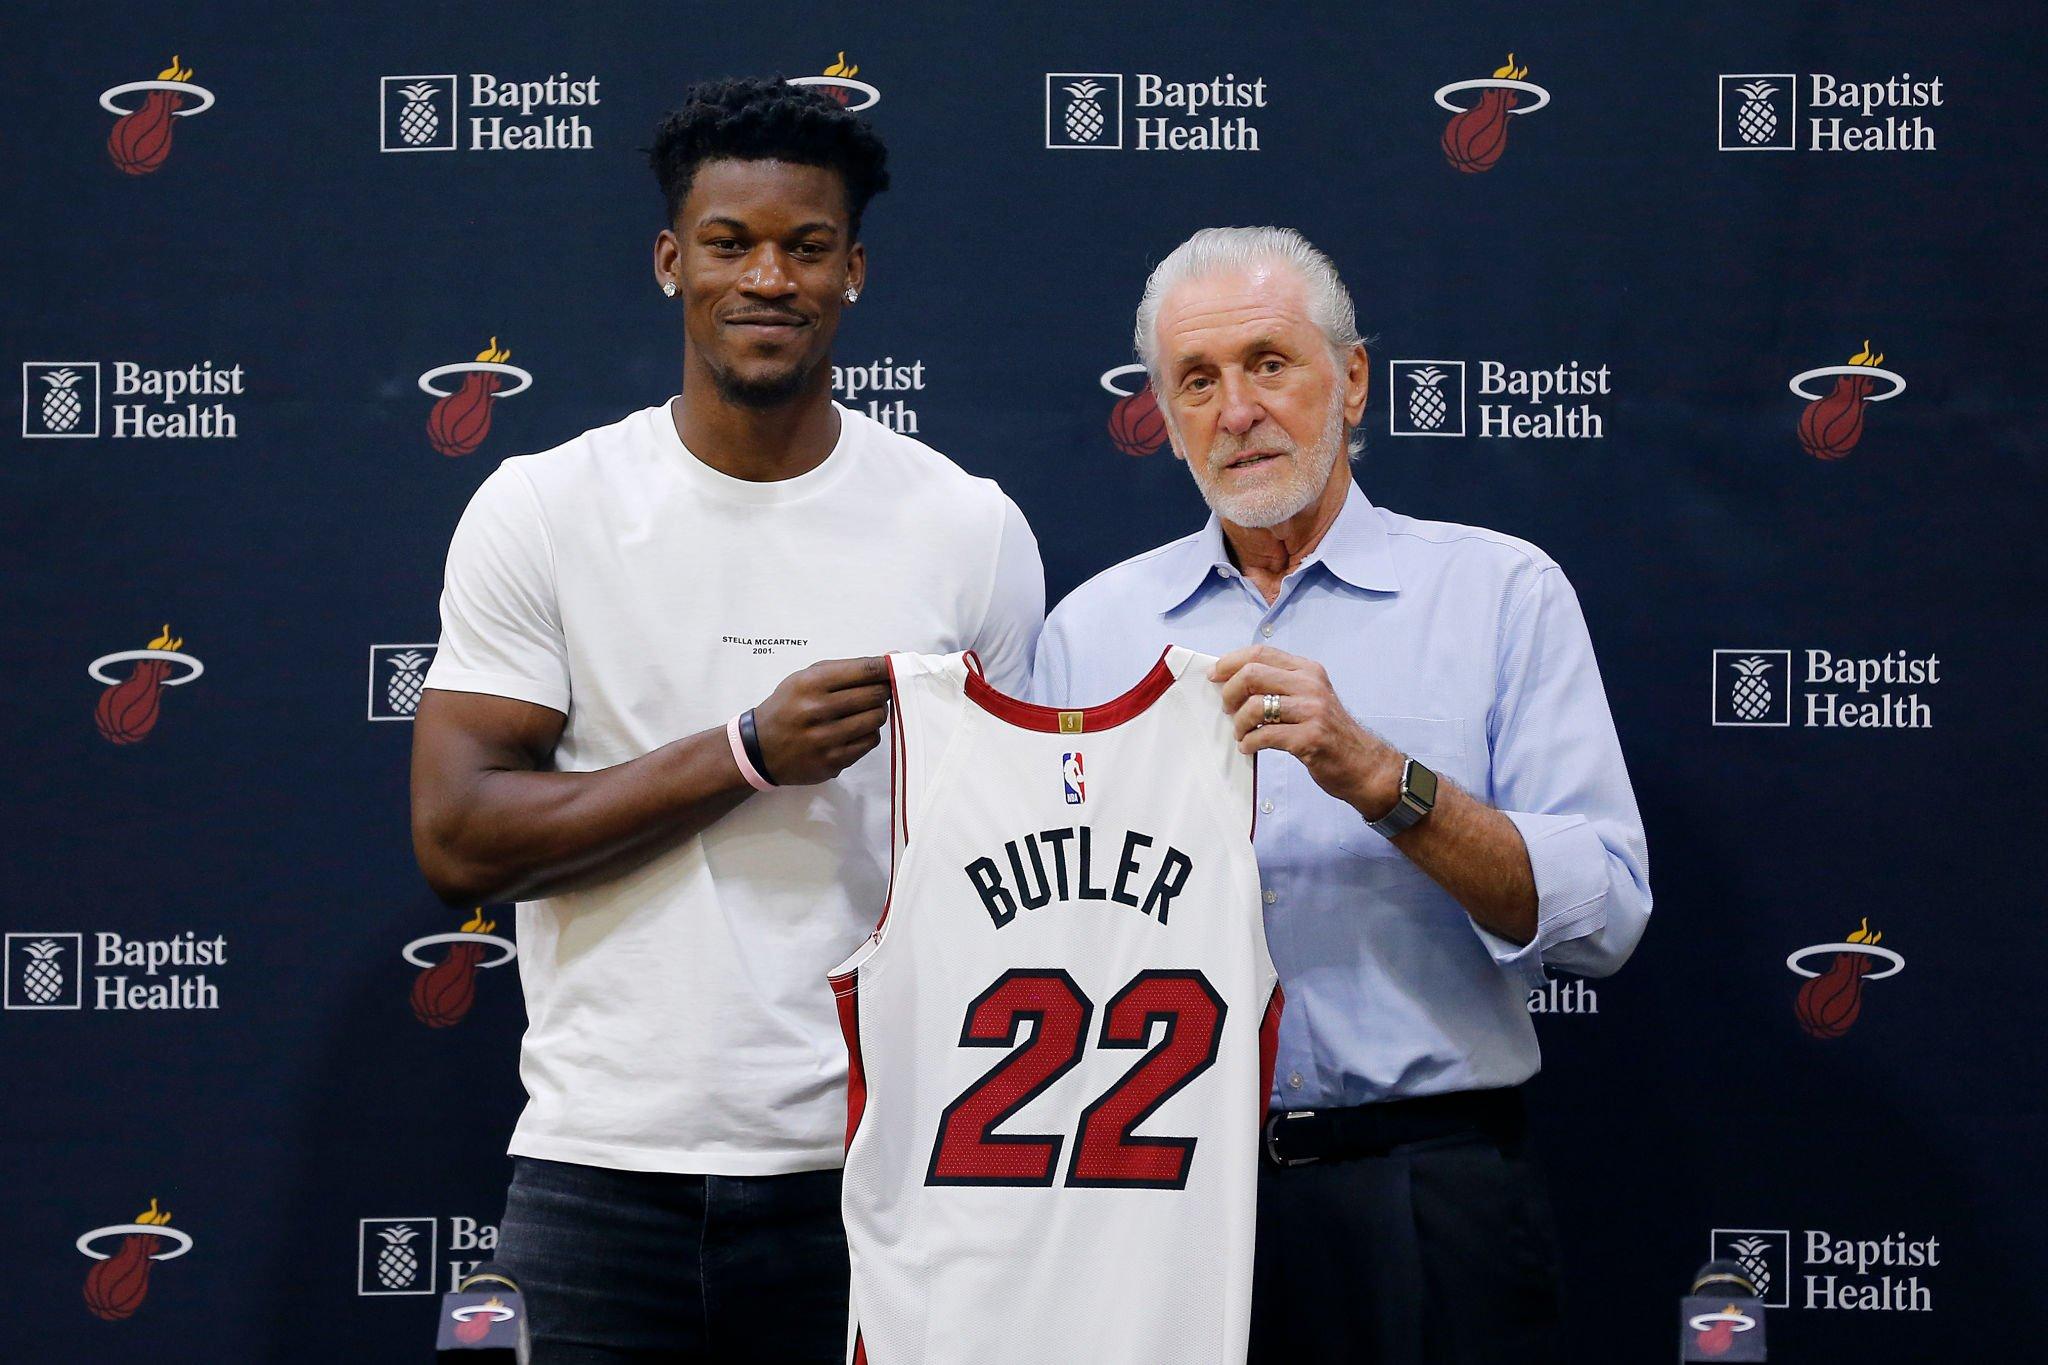 MIAMI, FLORIDA - SEPTEMBER 27: Jimmy Butler #22 of the Miami Heat poses for a photo with president Pat Riley during his introductory press conference at American Airlines Arena on September 27, 2019 in Miami, Florida. NOTE TO USER: User expressly acknowledges and agrees that, by downloading and or using this photograph, User is consenting to the terms and conditions of the Getty Images License Agreement. (Photo by Michael Reaves/Getty Images)